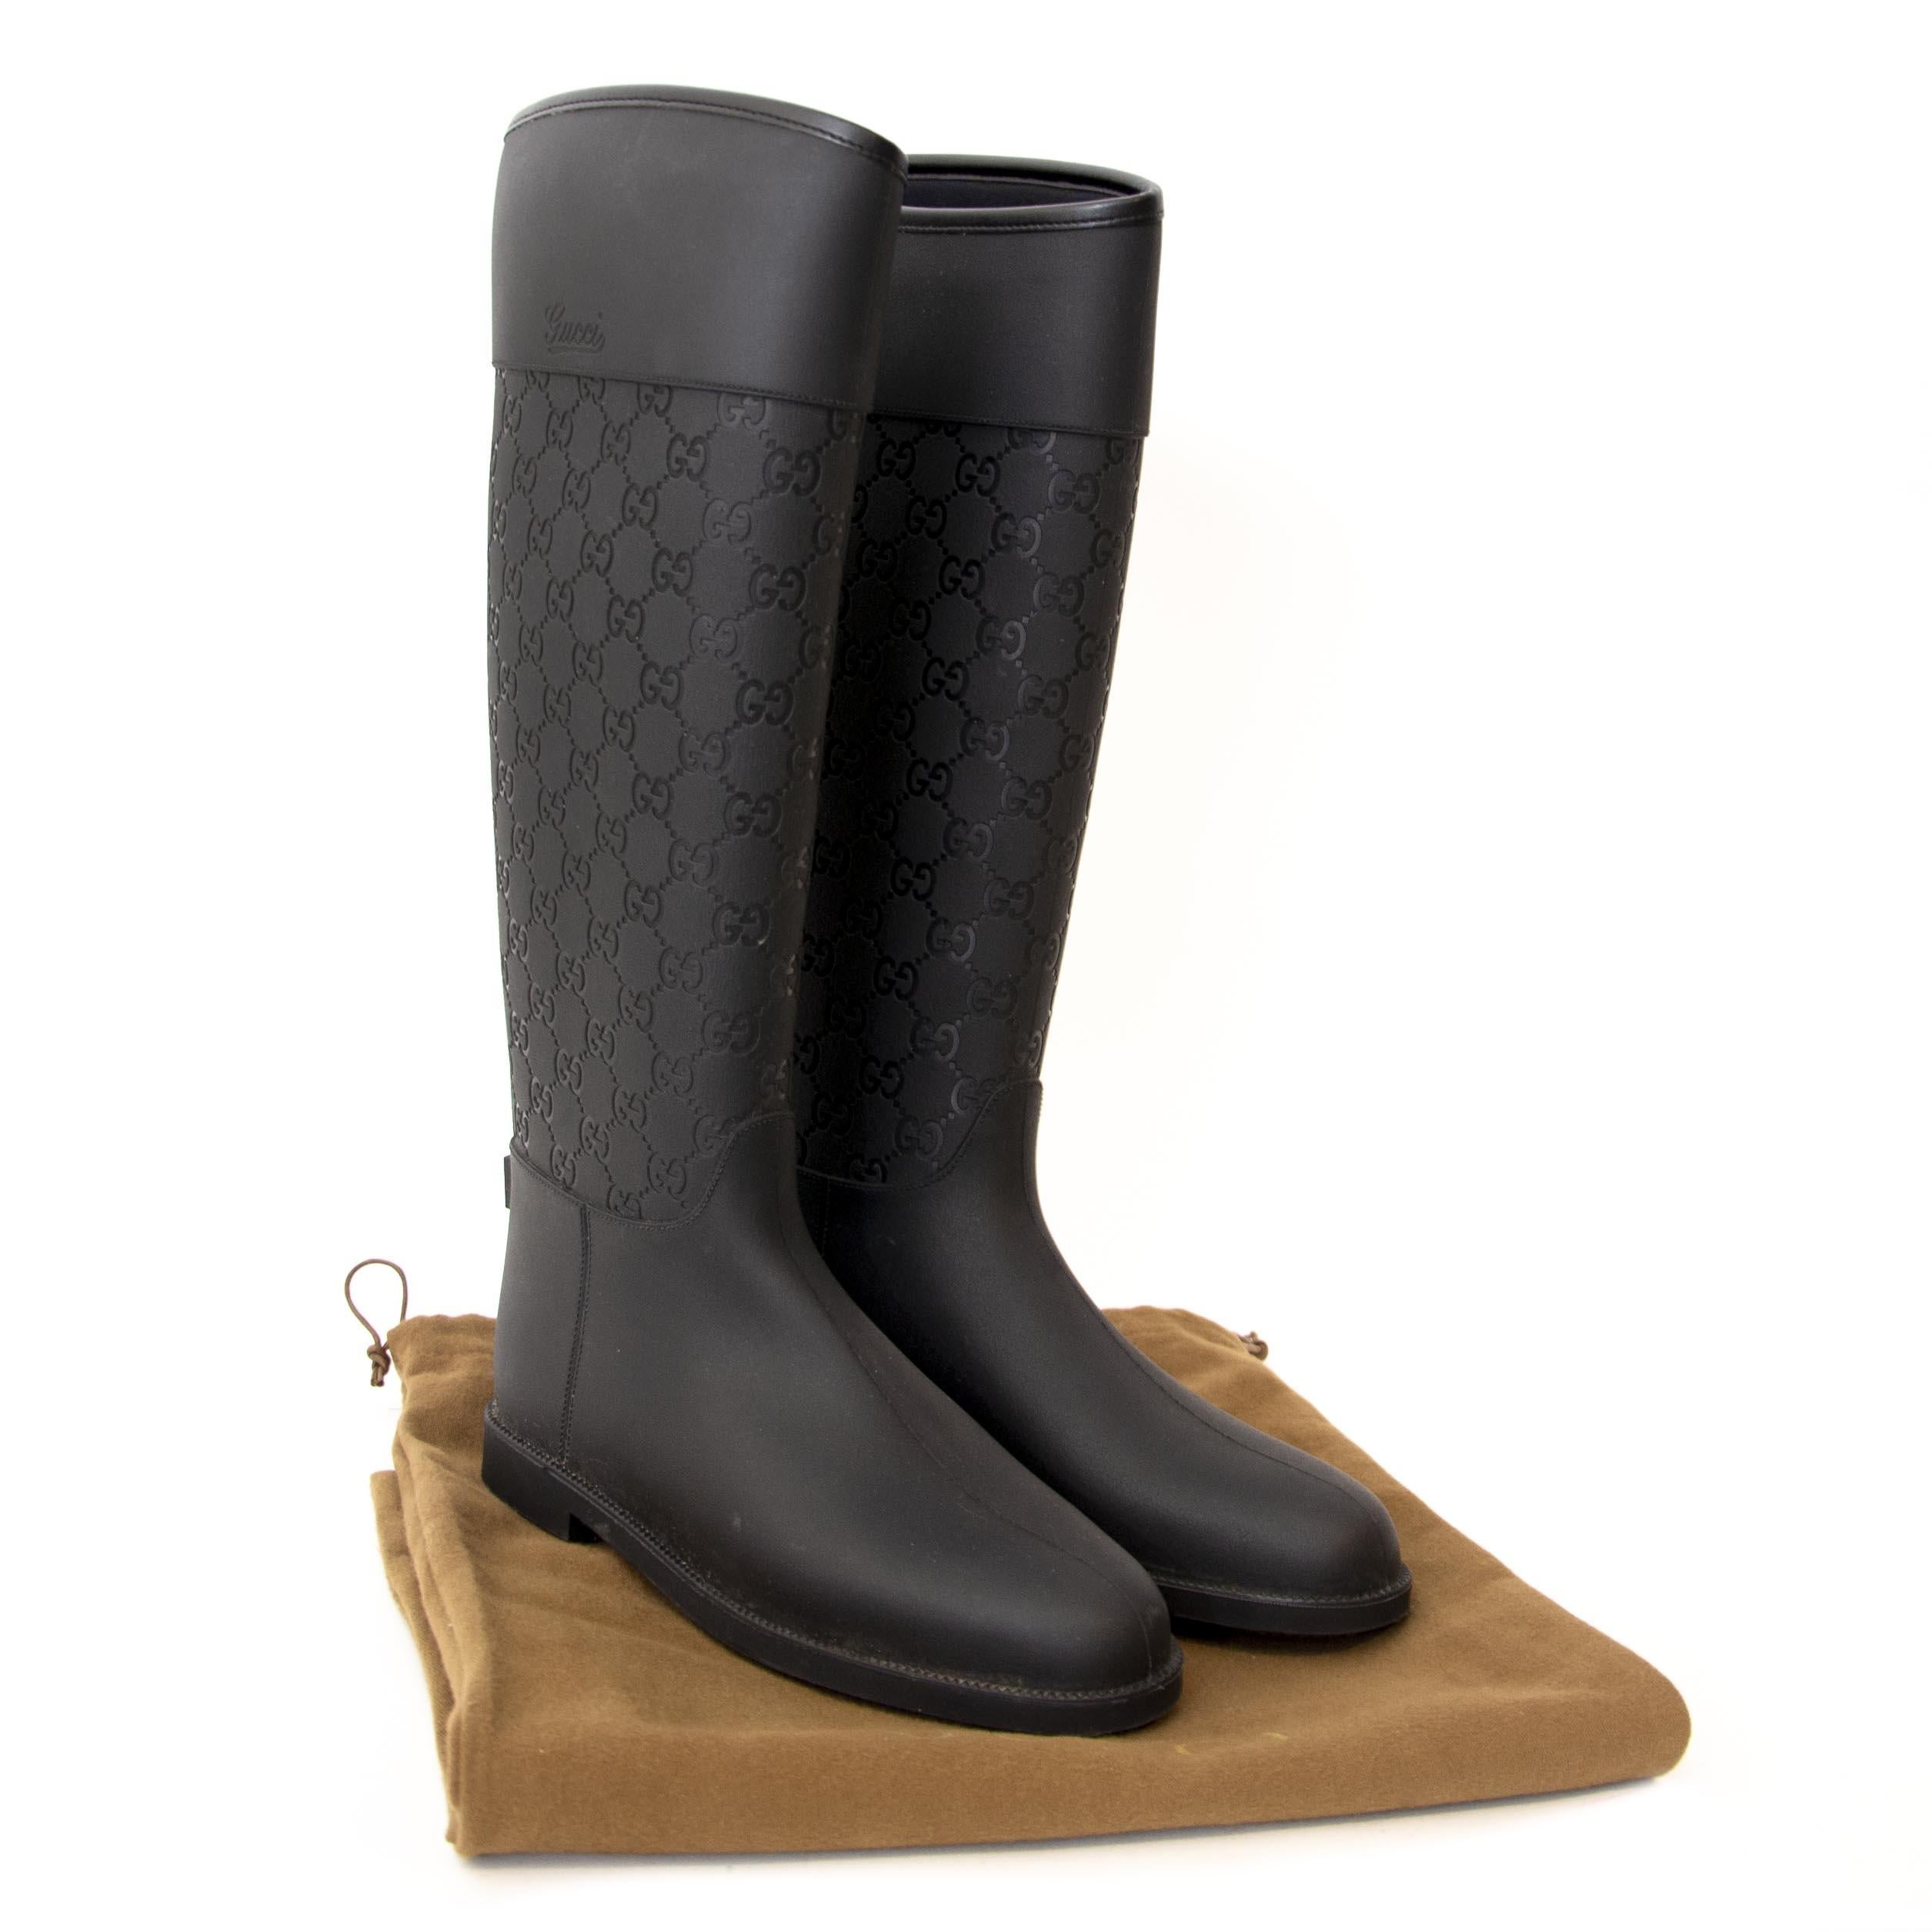 Very good condition

Burberry Check Rubber Rain Boots - Size 38

Battle rainy weather with these rubber Burberry boots. They come in the iconic Gucci monogram print.
These beauties will keep your feet dry and warm.